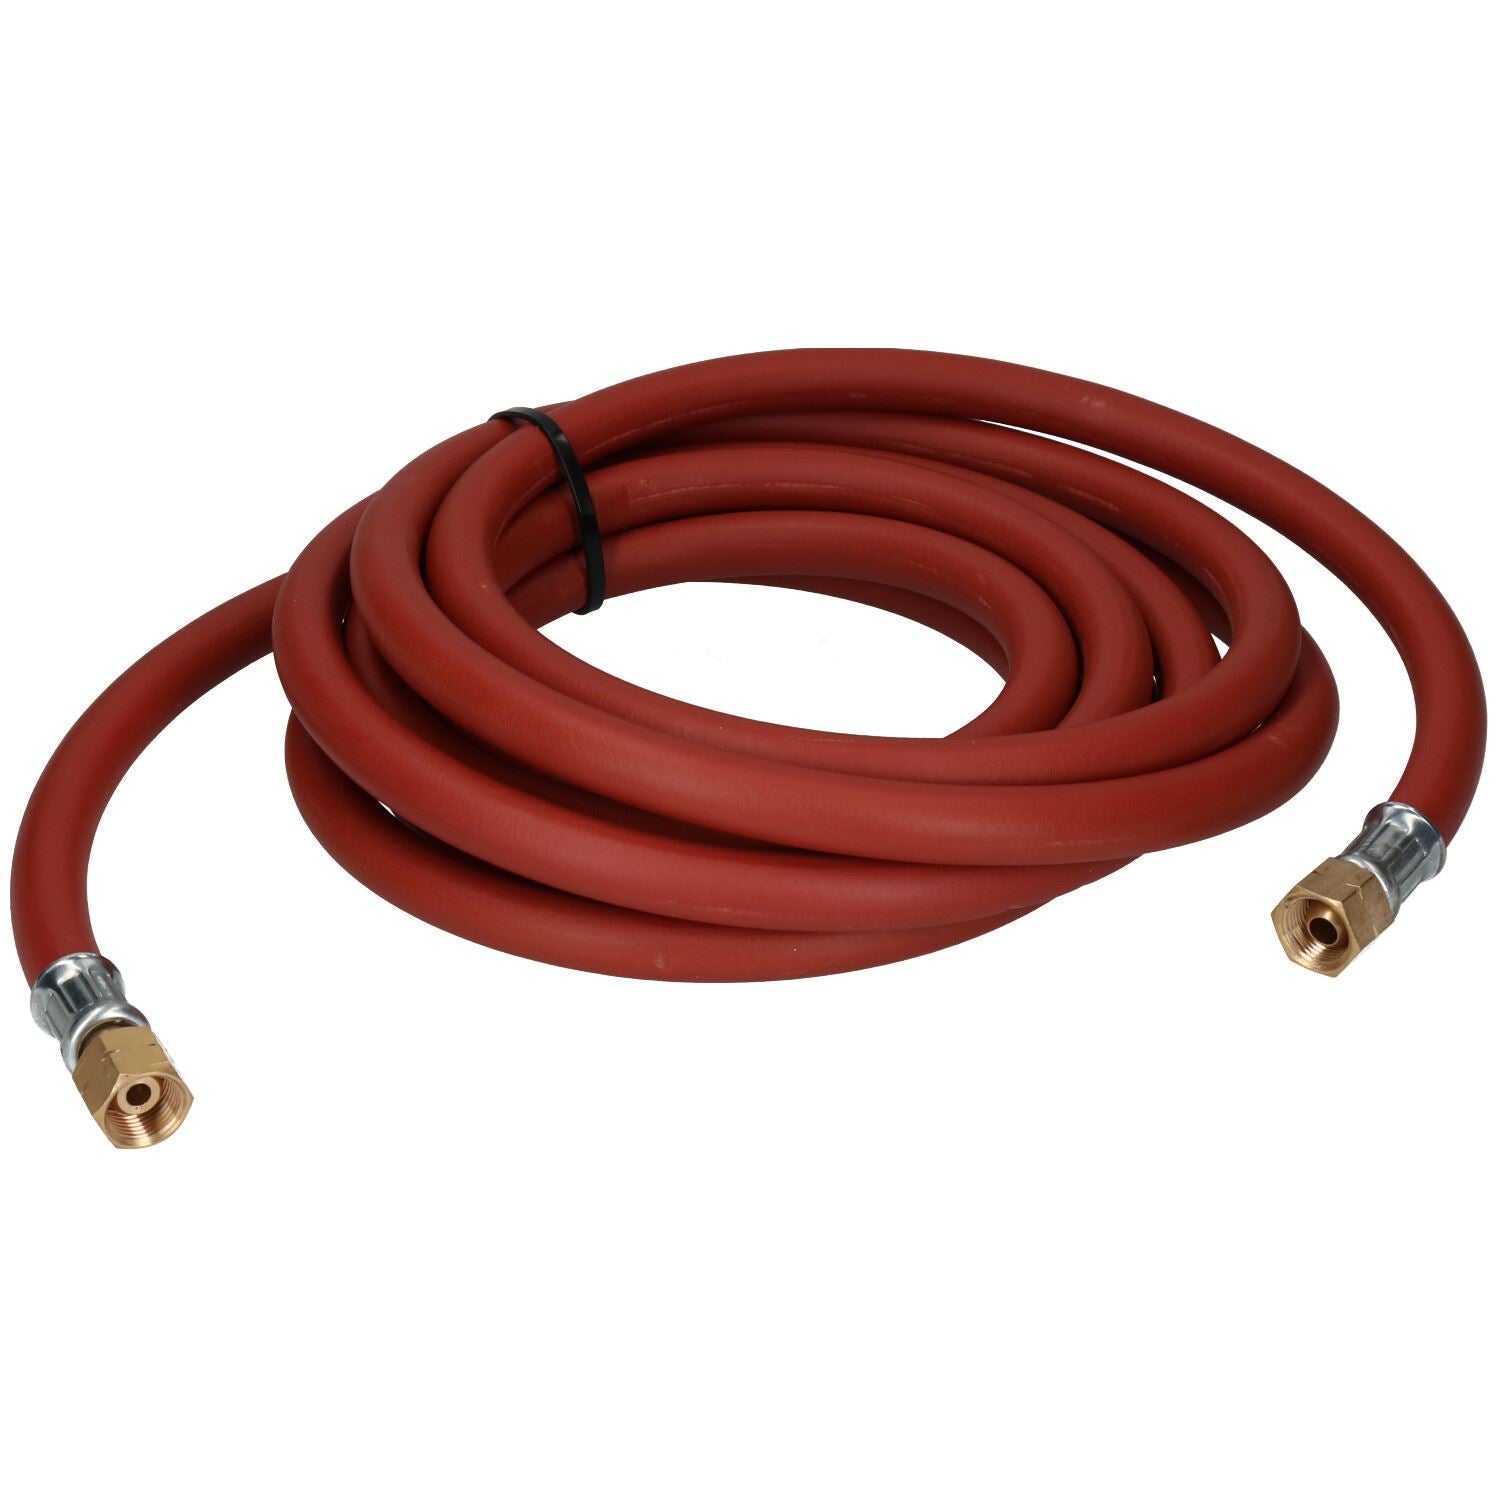 Single Acetylene Fitted Rubber Hose Pipe Cutting & Welding 10M 3/8" BSP Gas